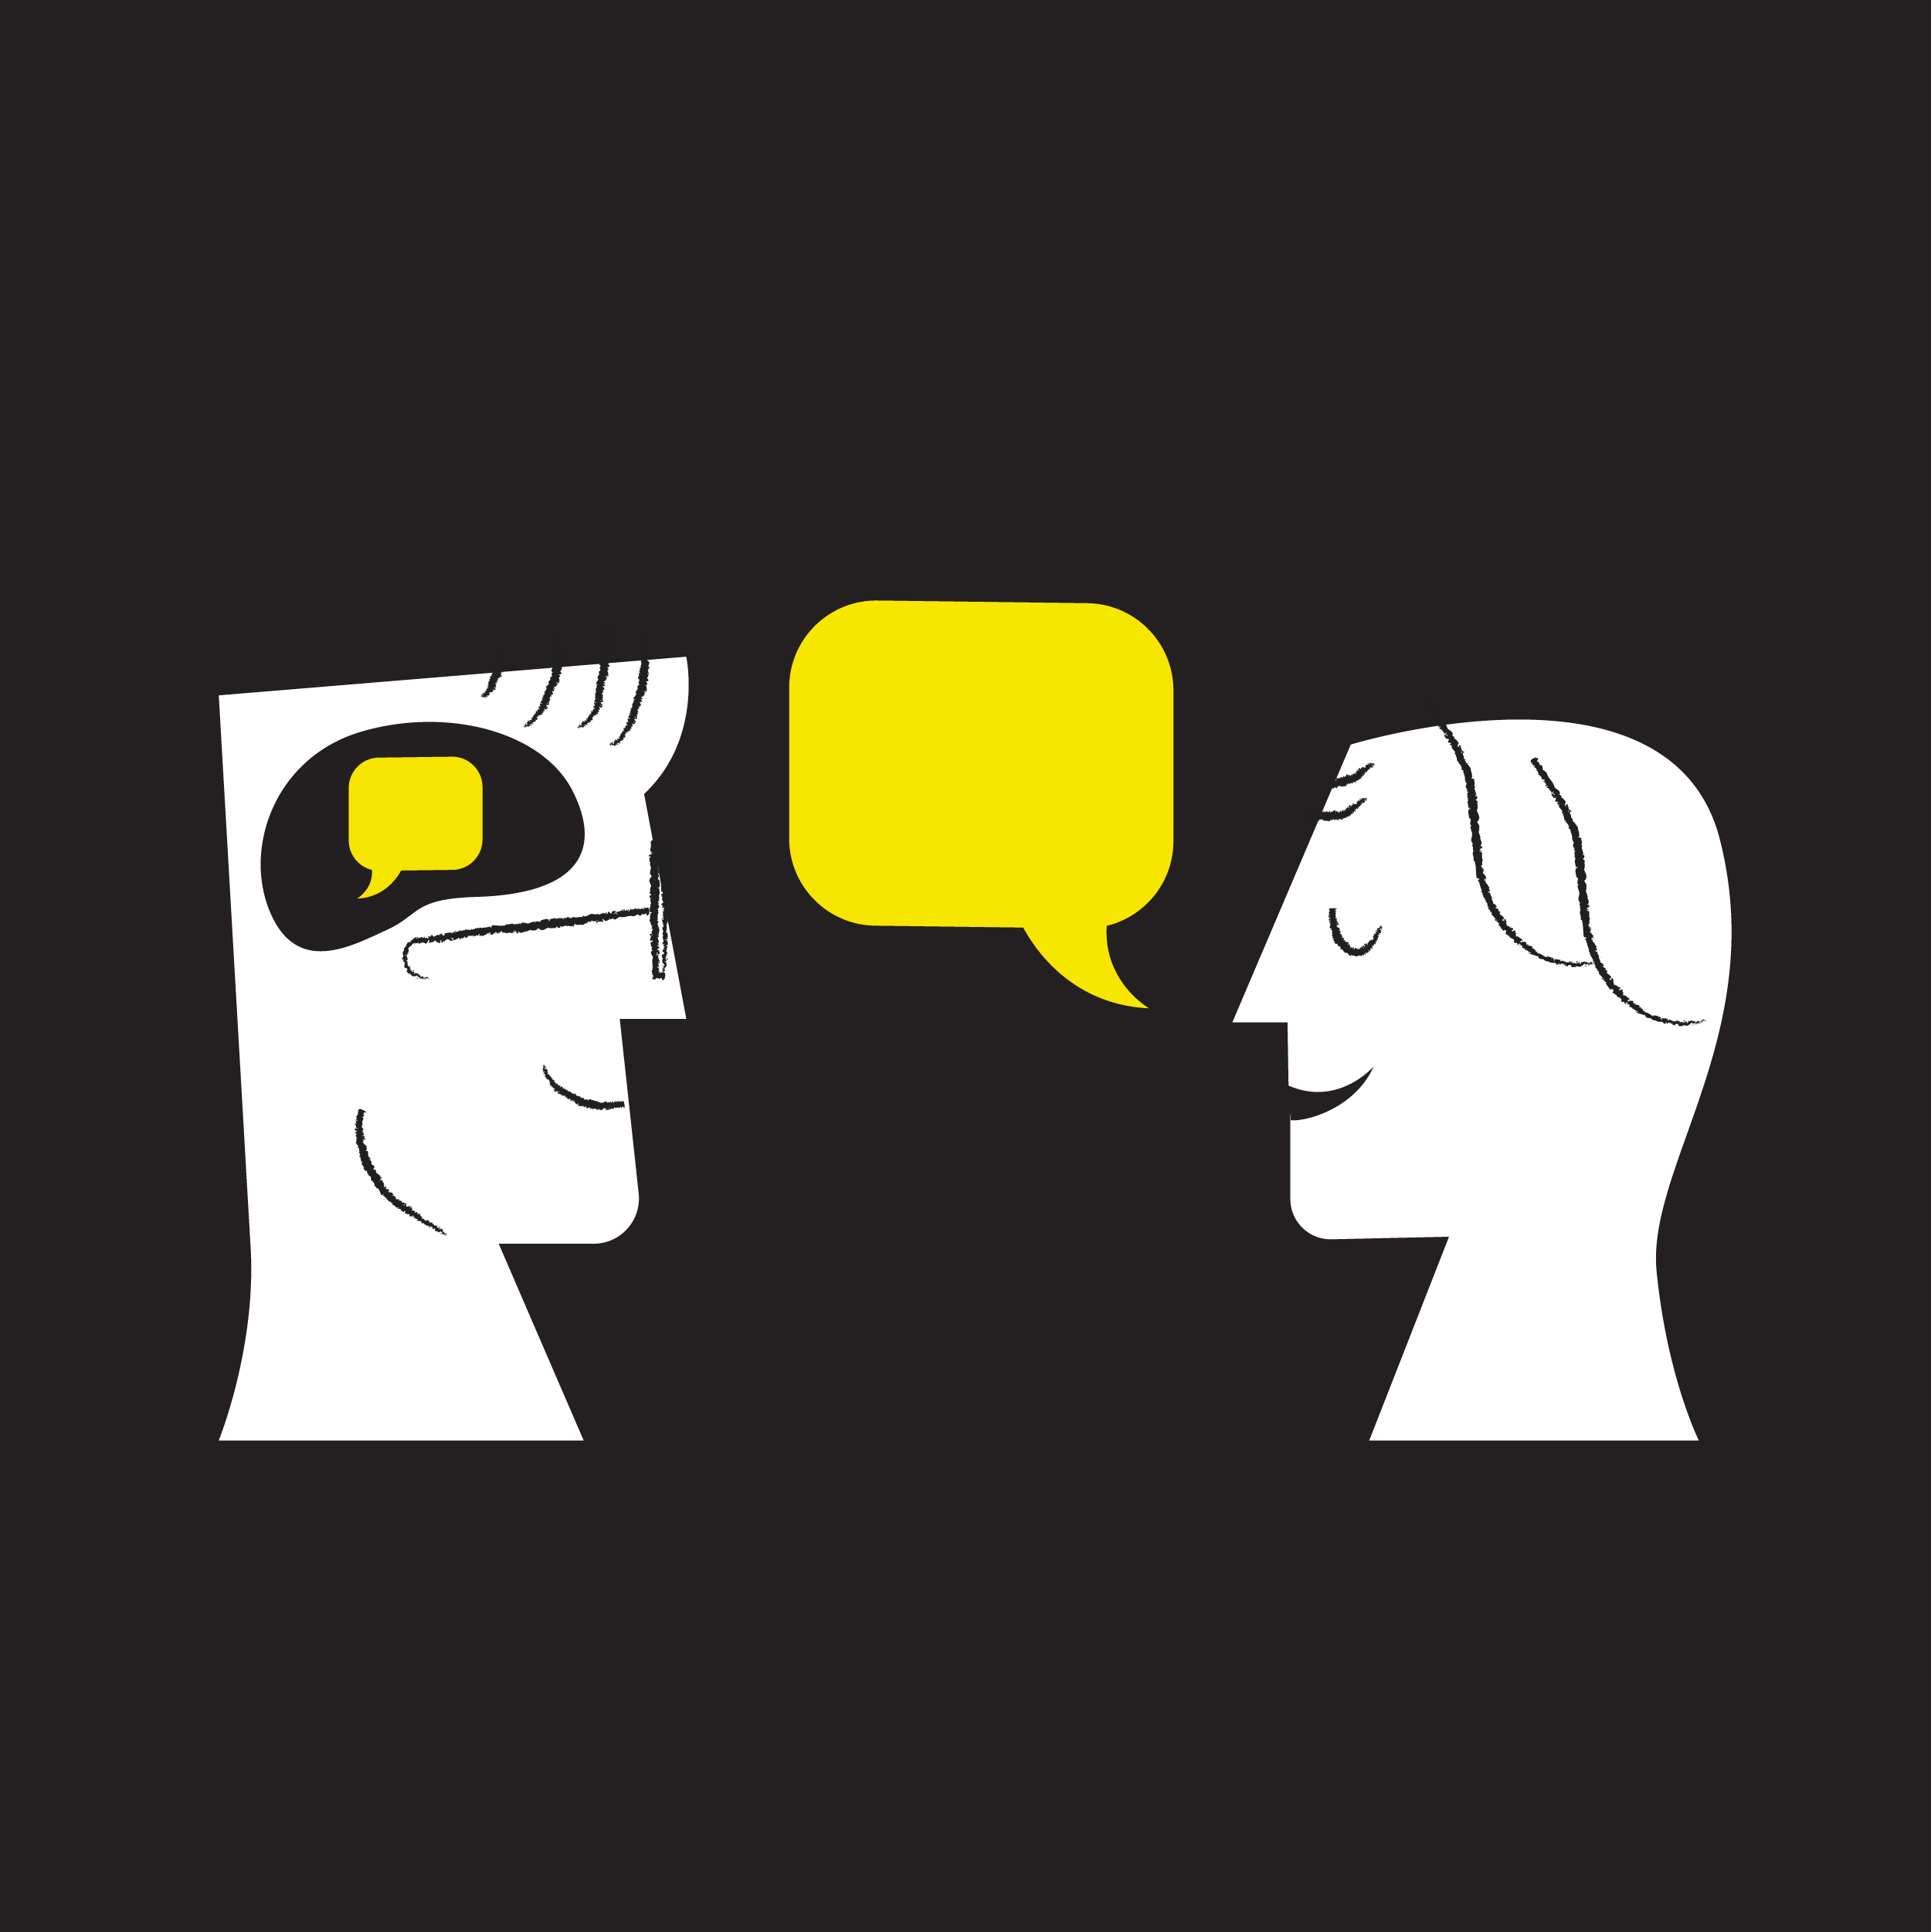 one person with a speech bubble speaking to the other who has the same speech bubble in his mind. this represents similar cultural values, or core values.